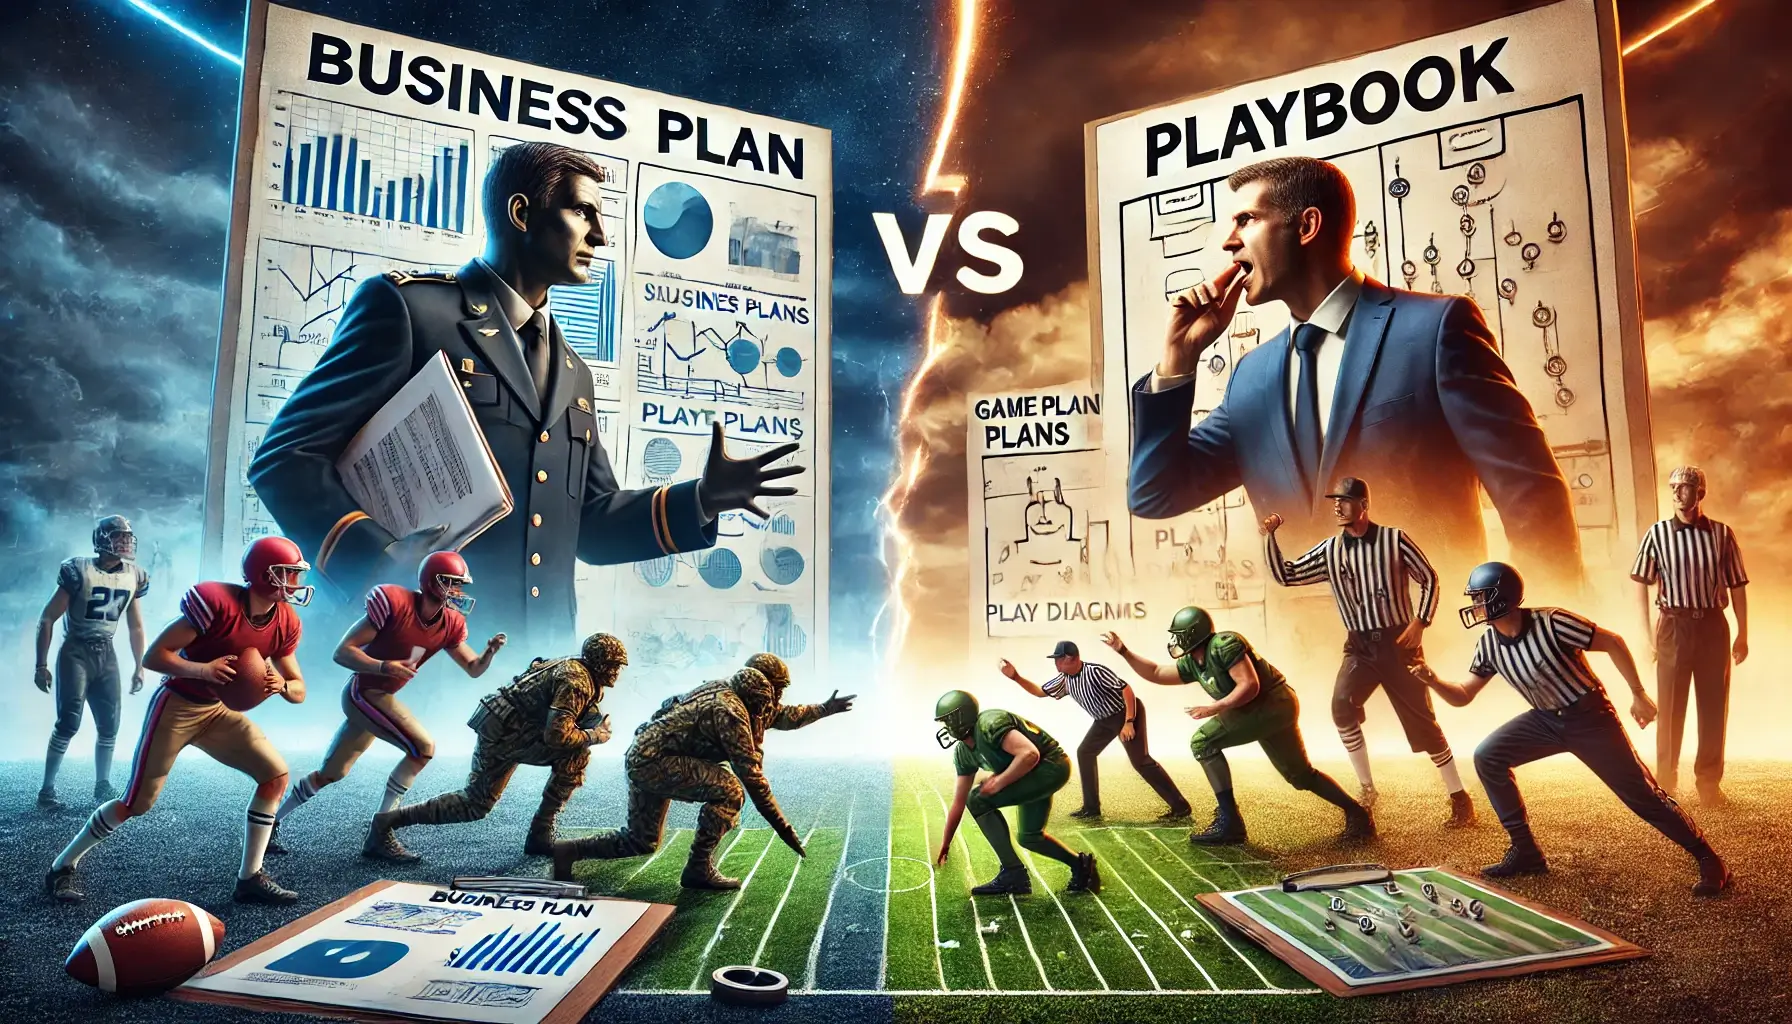 An AI-generated image of a business plan on one side, versus a playbook on the other side